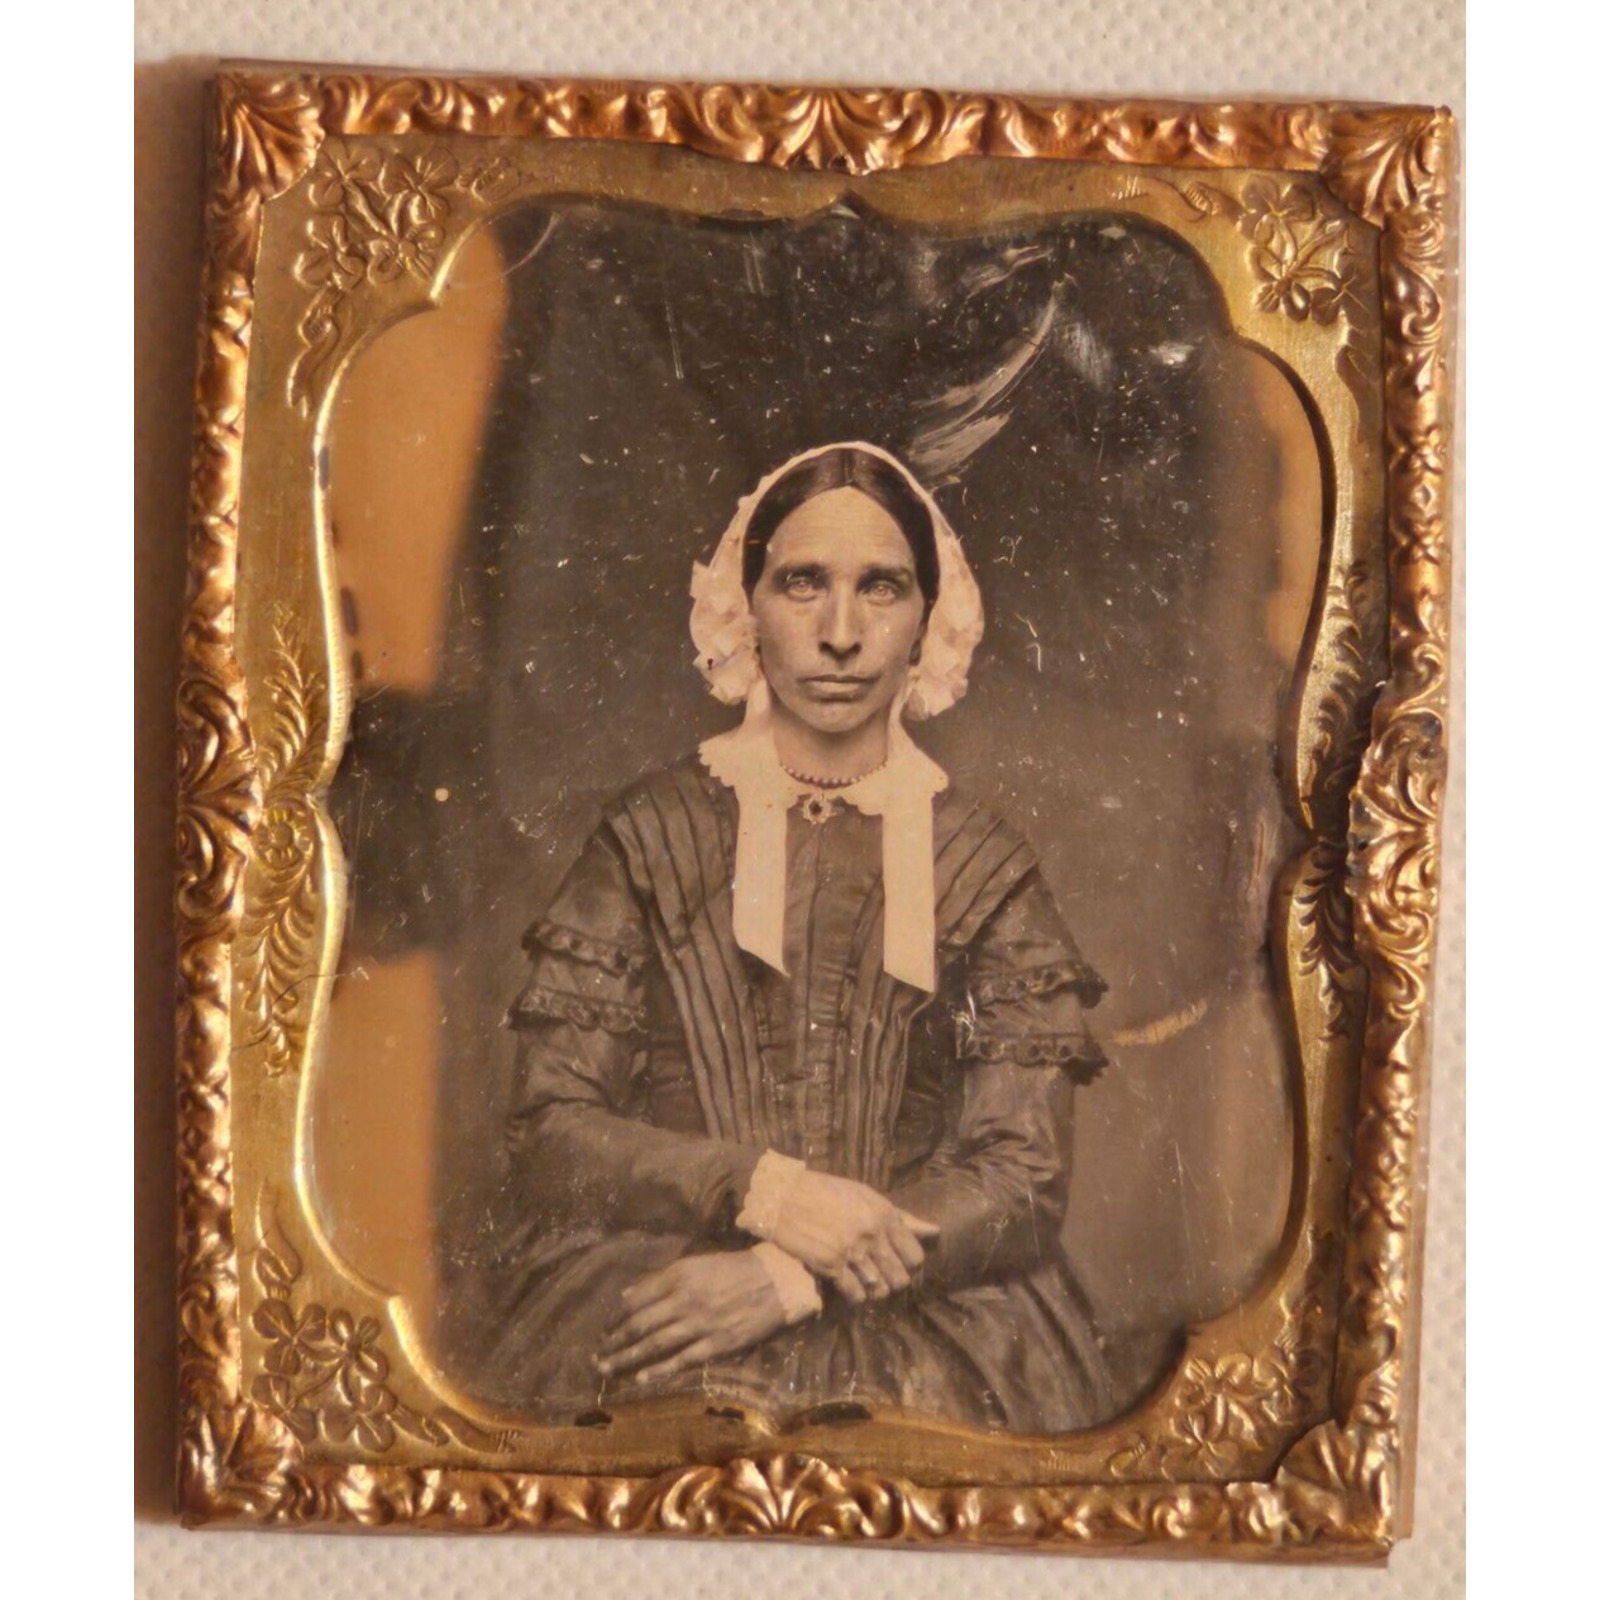 1/6th Plate Daguerreotype Of A Woman With Interesting Eyes